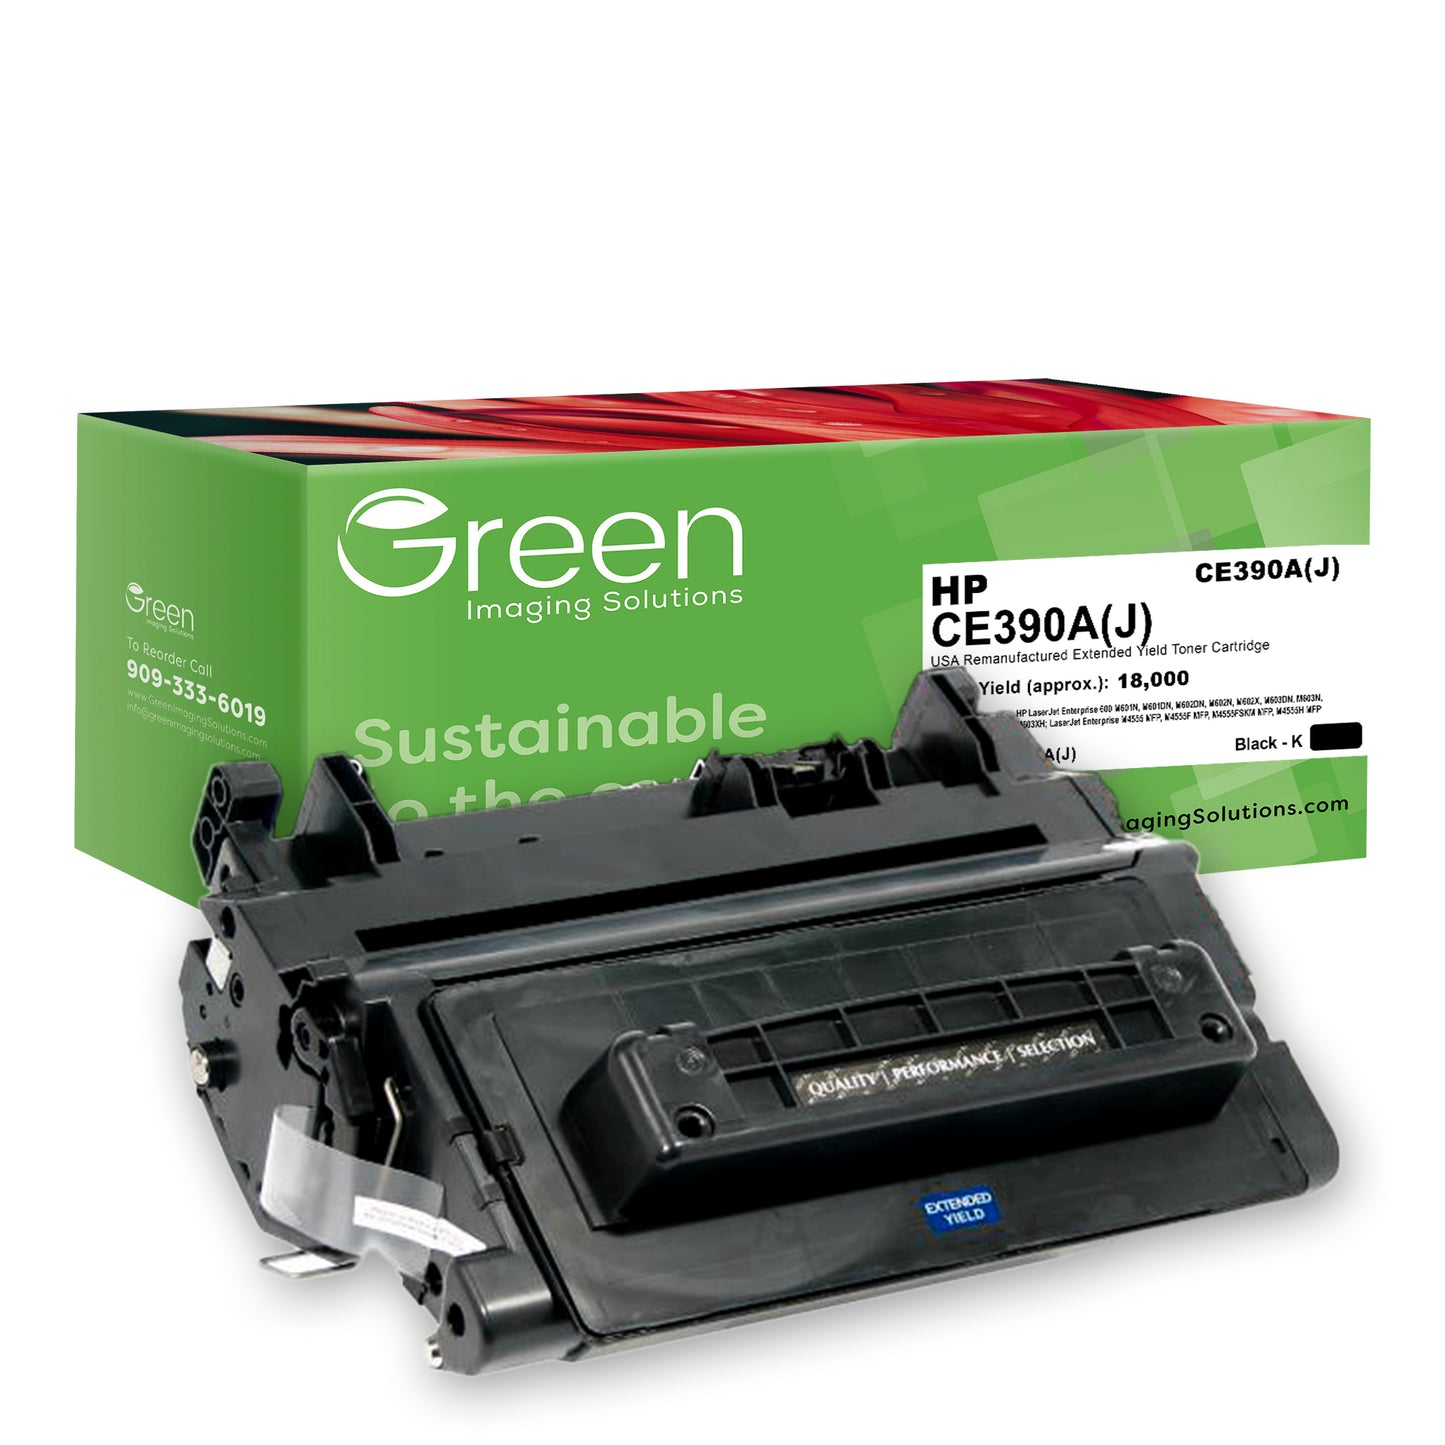 GIS USA Remanufactured Extended Yield Toner Cartridge for HP CE390A